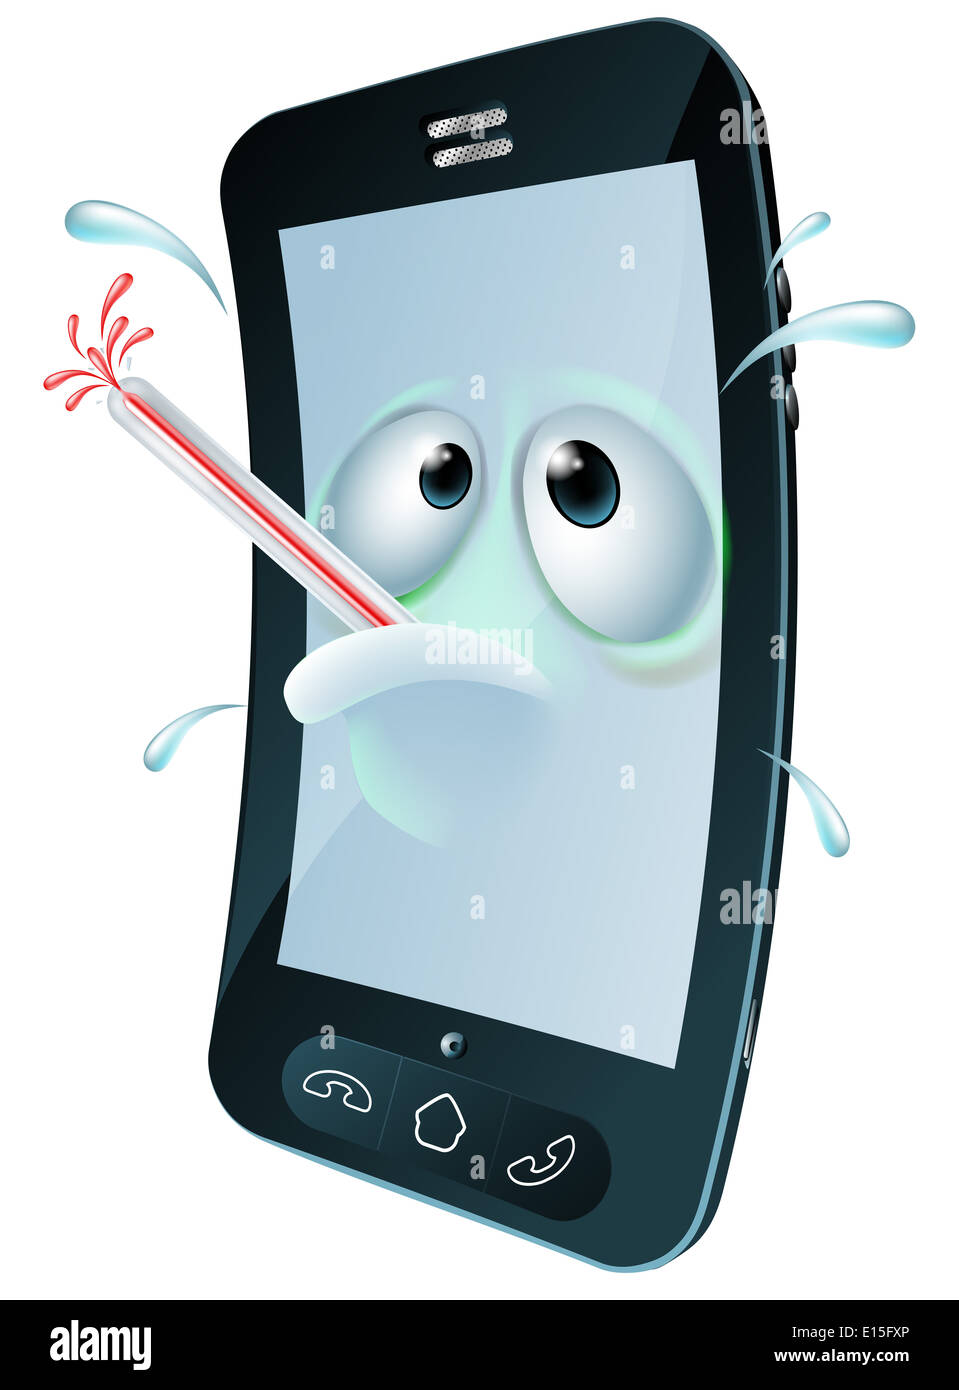 An unwell mobile phone mascot character overheating and sweating with a thermometer in its mouth. Concept for a broken phone or Stock Photo